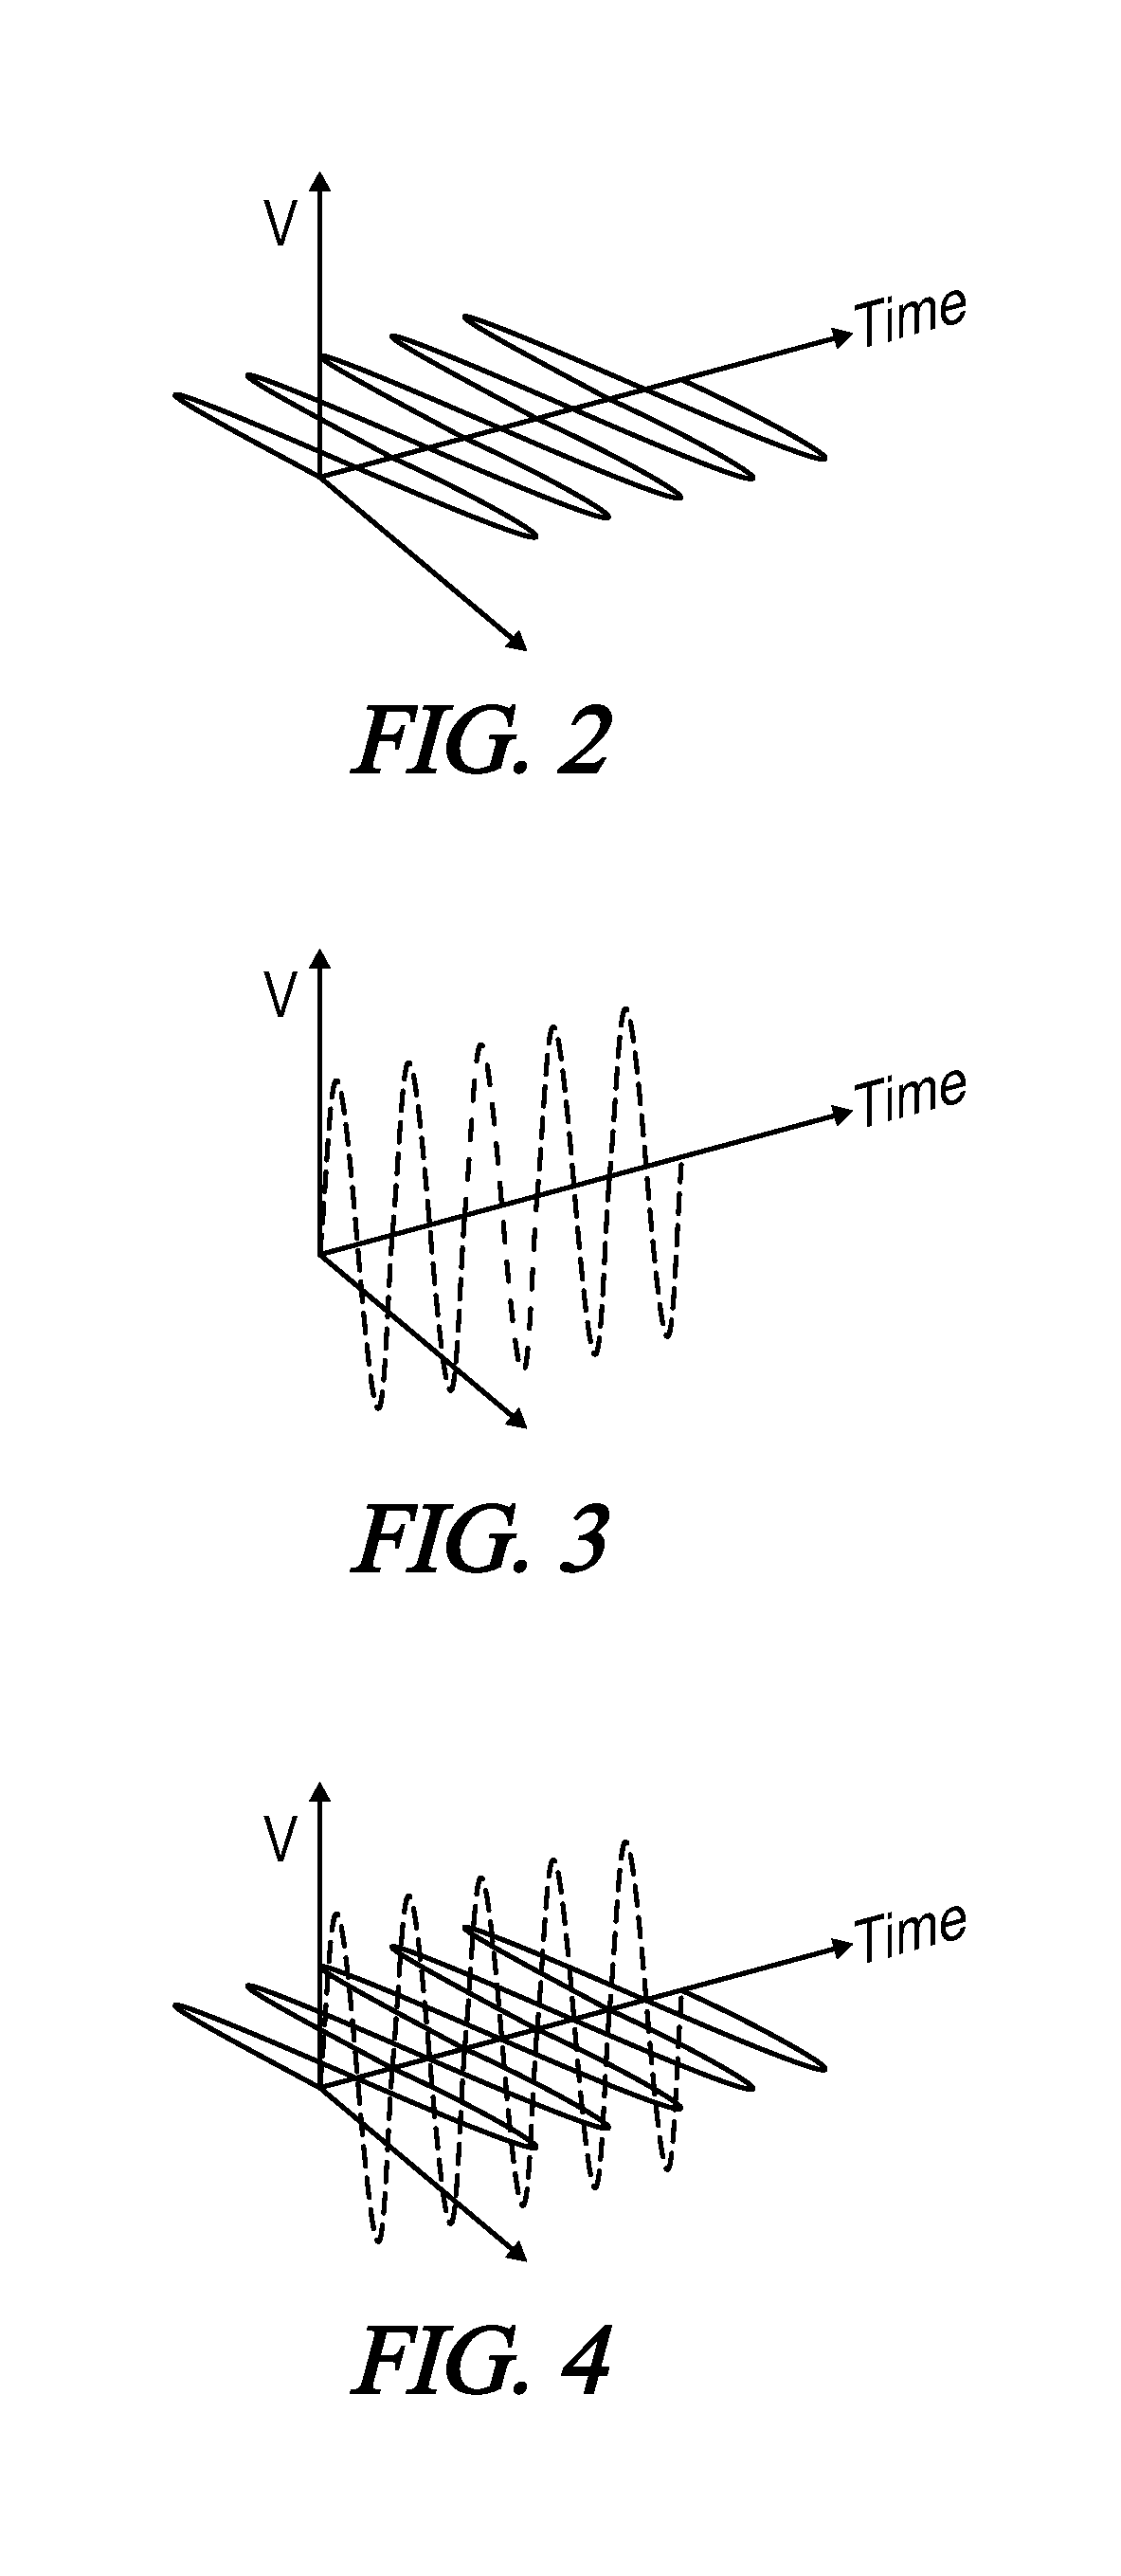 Systems and methods for calibrating dual polarization radar systems